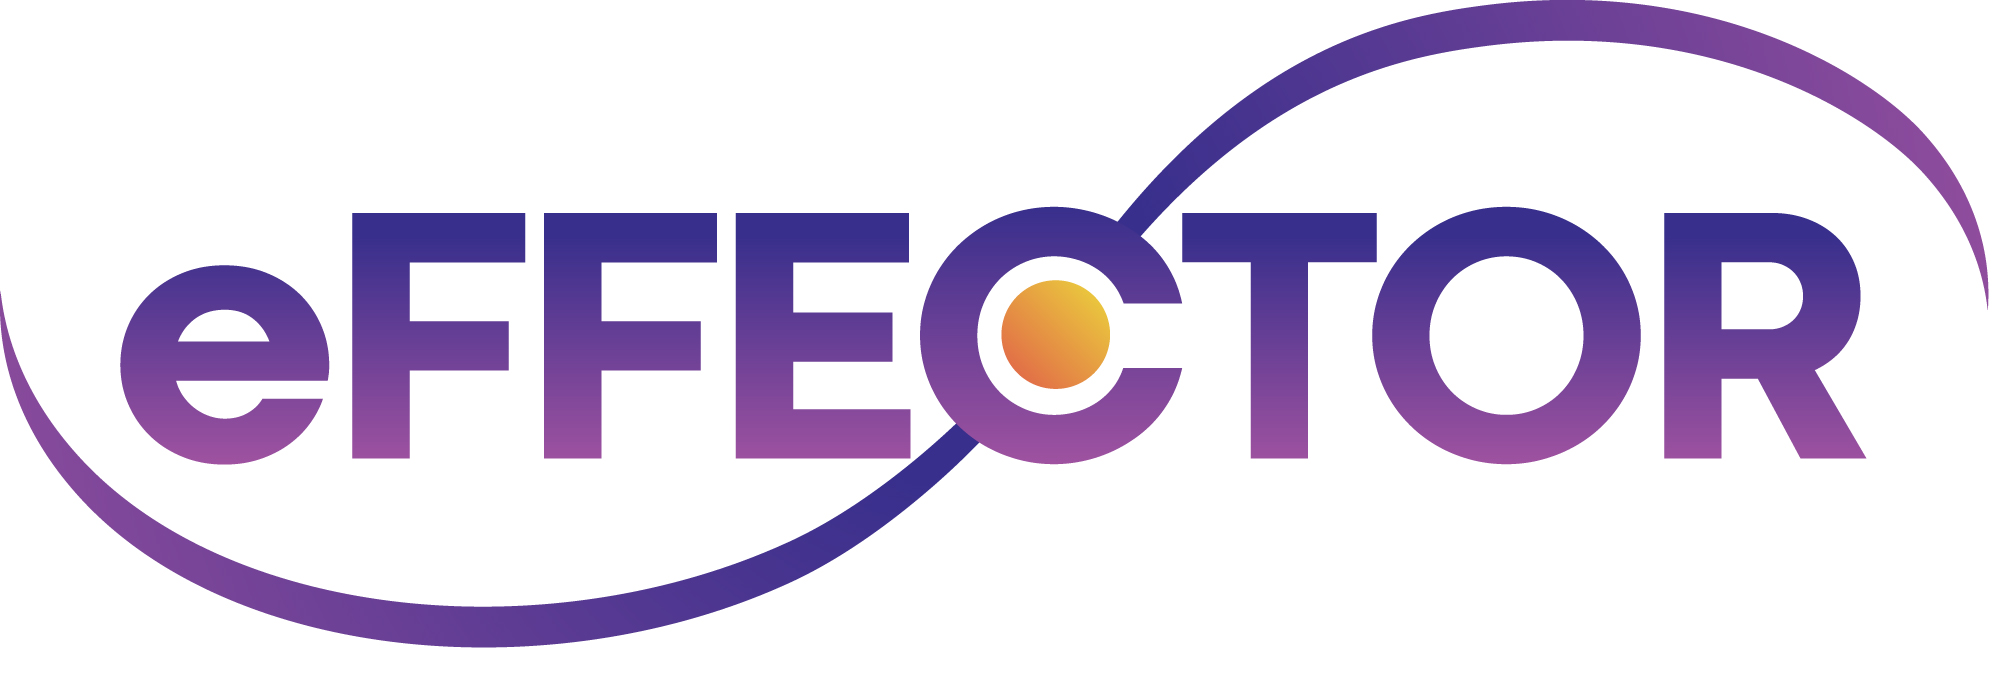 eFFECTOR to Present Updated Clinical Data from Phase 2 Expansion Cohorts for Zotatifin in Patients with ER+ Metastatic Breast Cancer at ASCO 2023 Annual Meeting